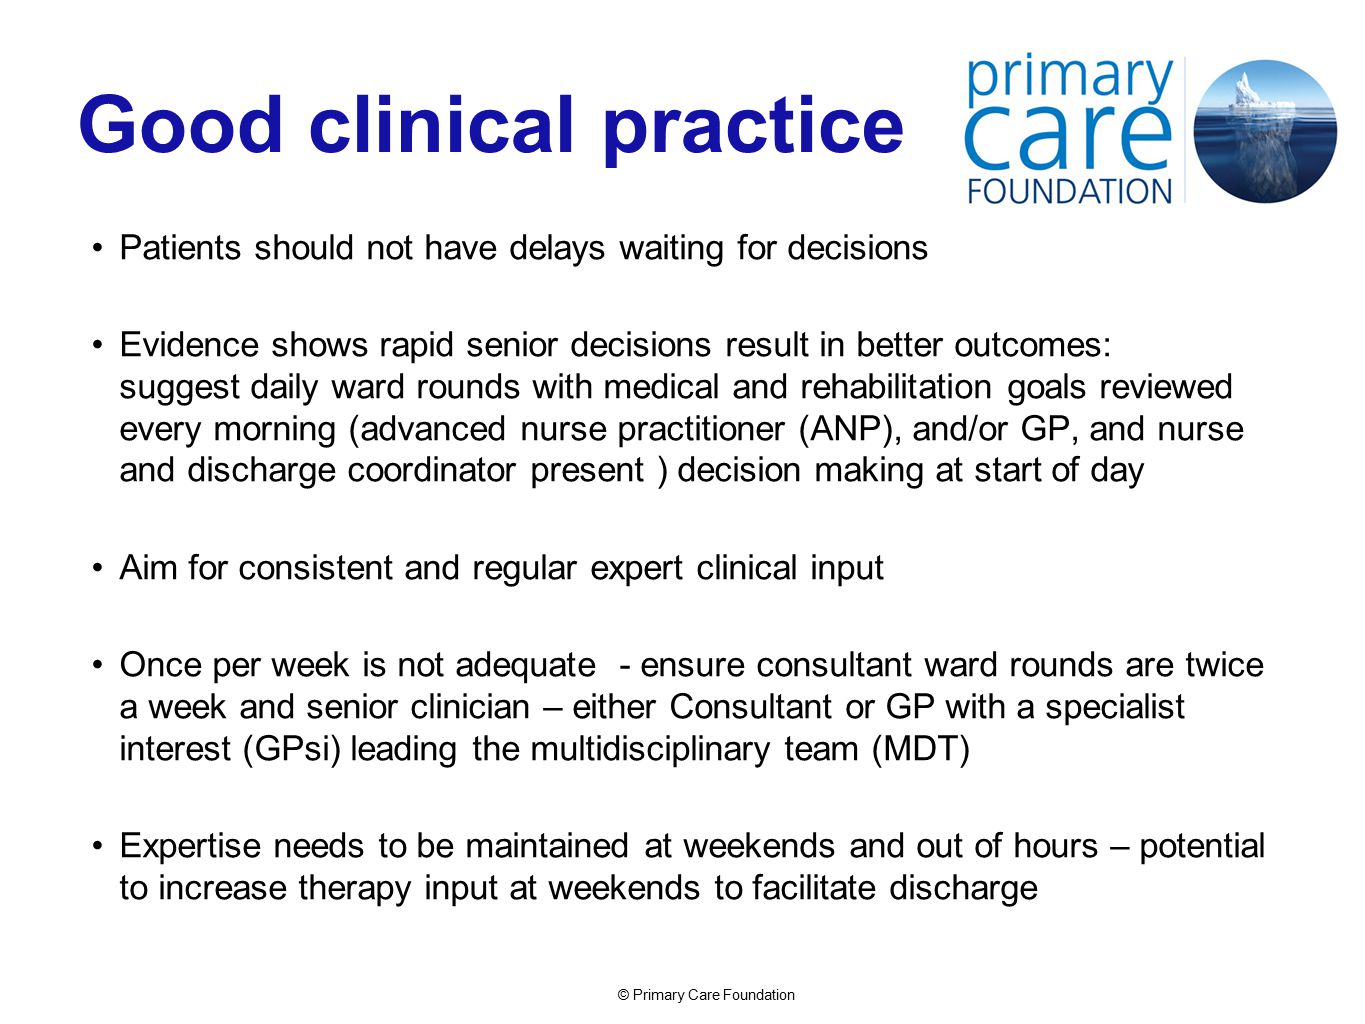 © Primary Care Foundation Good clinical practice Patients should not have delays waiting for decisions Evidence shows rapid senior decisions result in better outcomes: suggest daily ward rounds with medical and rehabilitation goals reviewed every morning (advanced nurse practitioner (ANP), and/or GP, and nurse and discharge coordinator present ) decision making at start of day Aim for consistent and regular expert clinical input Once per week is not adequate - ensure consultant ward rounds are twice a week and senior clinician – either Consultant or GP with a specialist interest (GPsi) leading the multidisciplinary team (MDT) Expertise needs to be maintained at weekends and out of hours – potential to increase therapy input at weekends to facilitate discharge